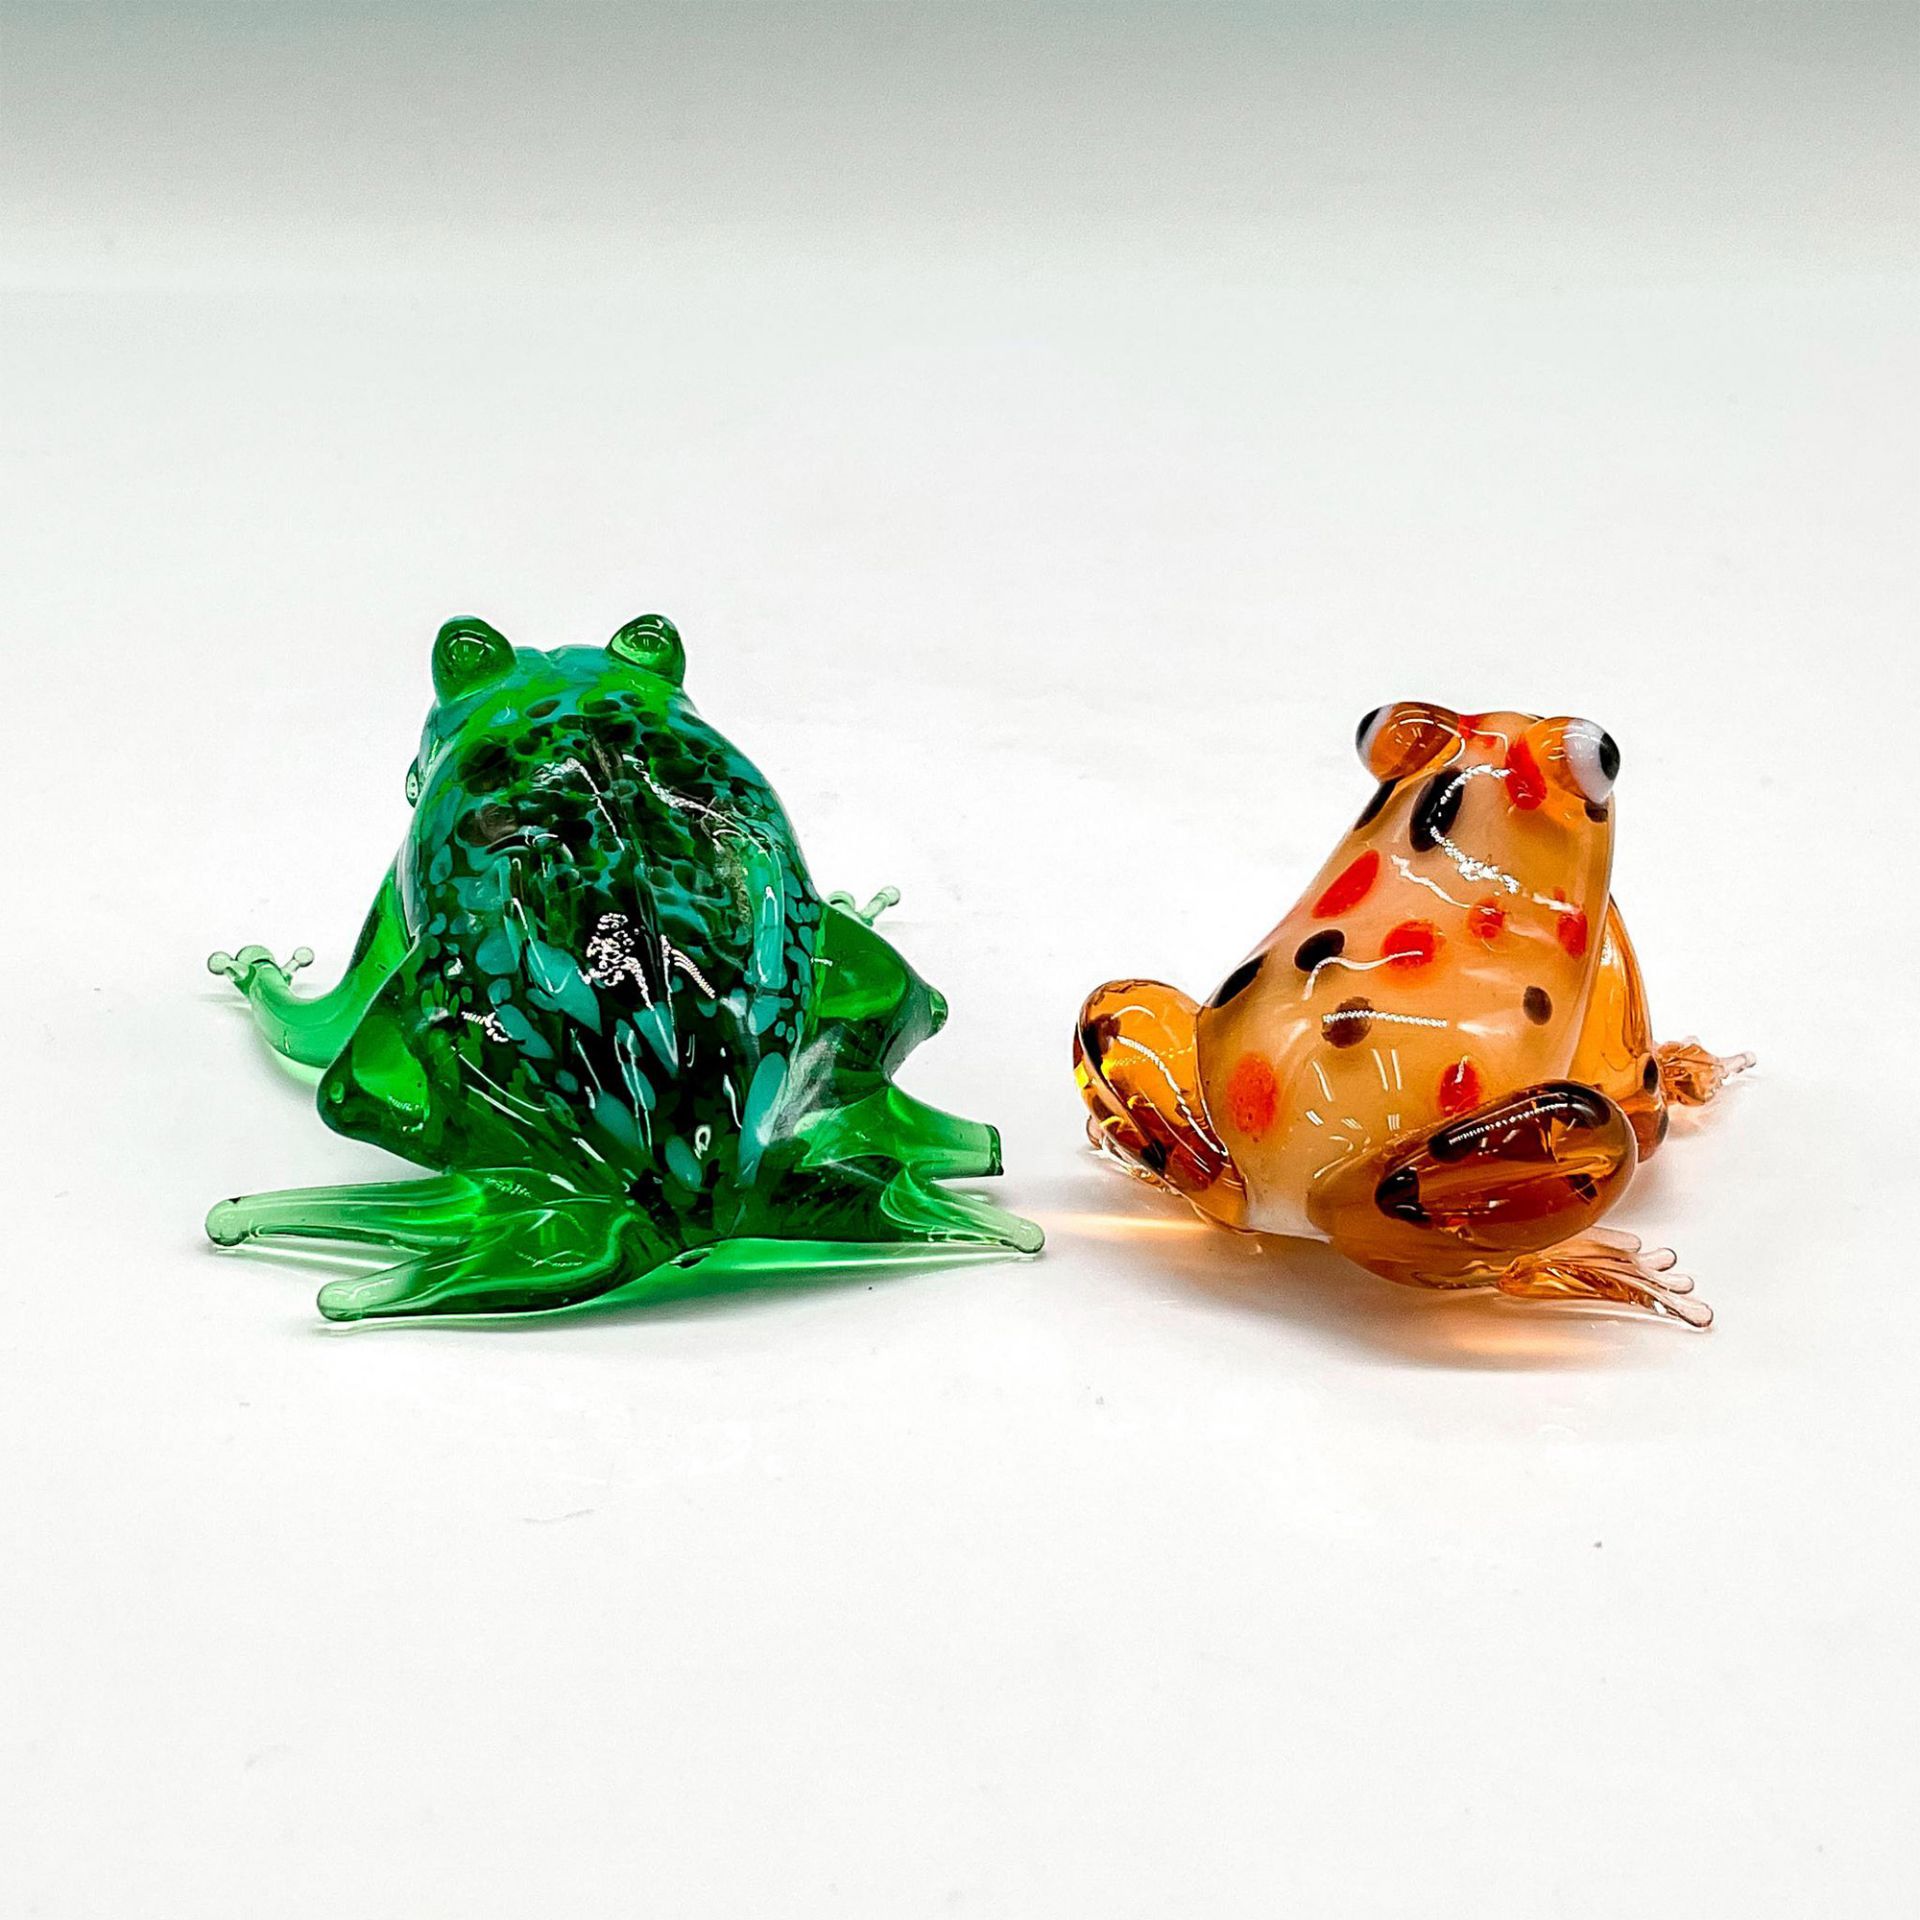 2pc Global Village Art Glass Figurines, Frogs - Image 2 of 3